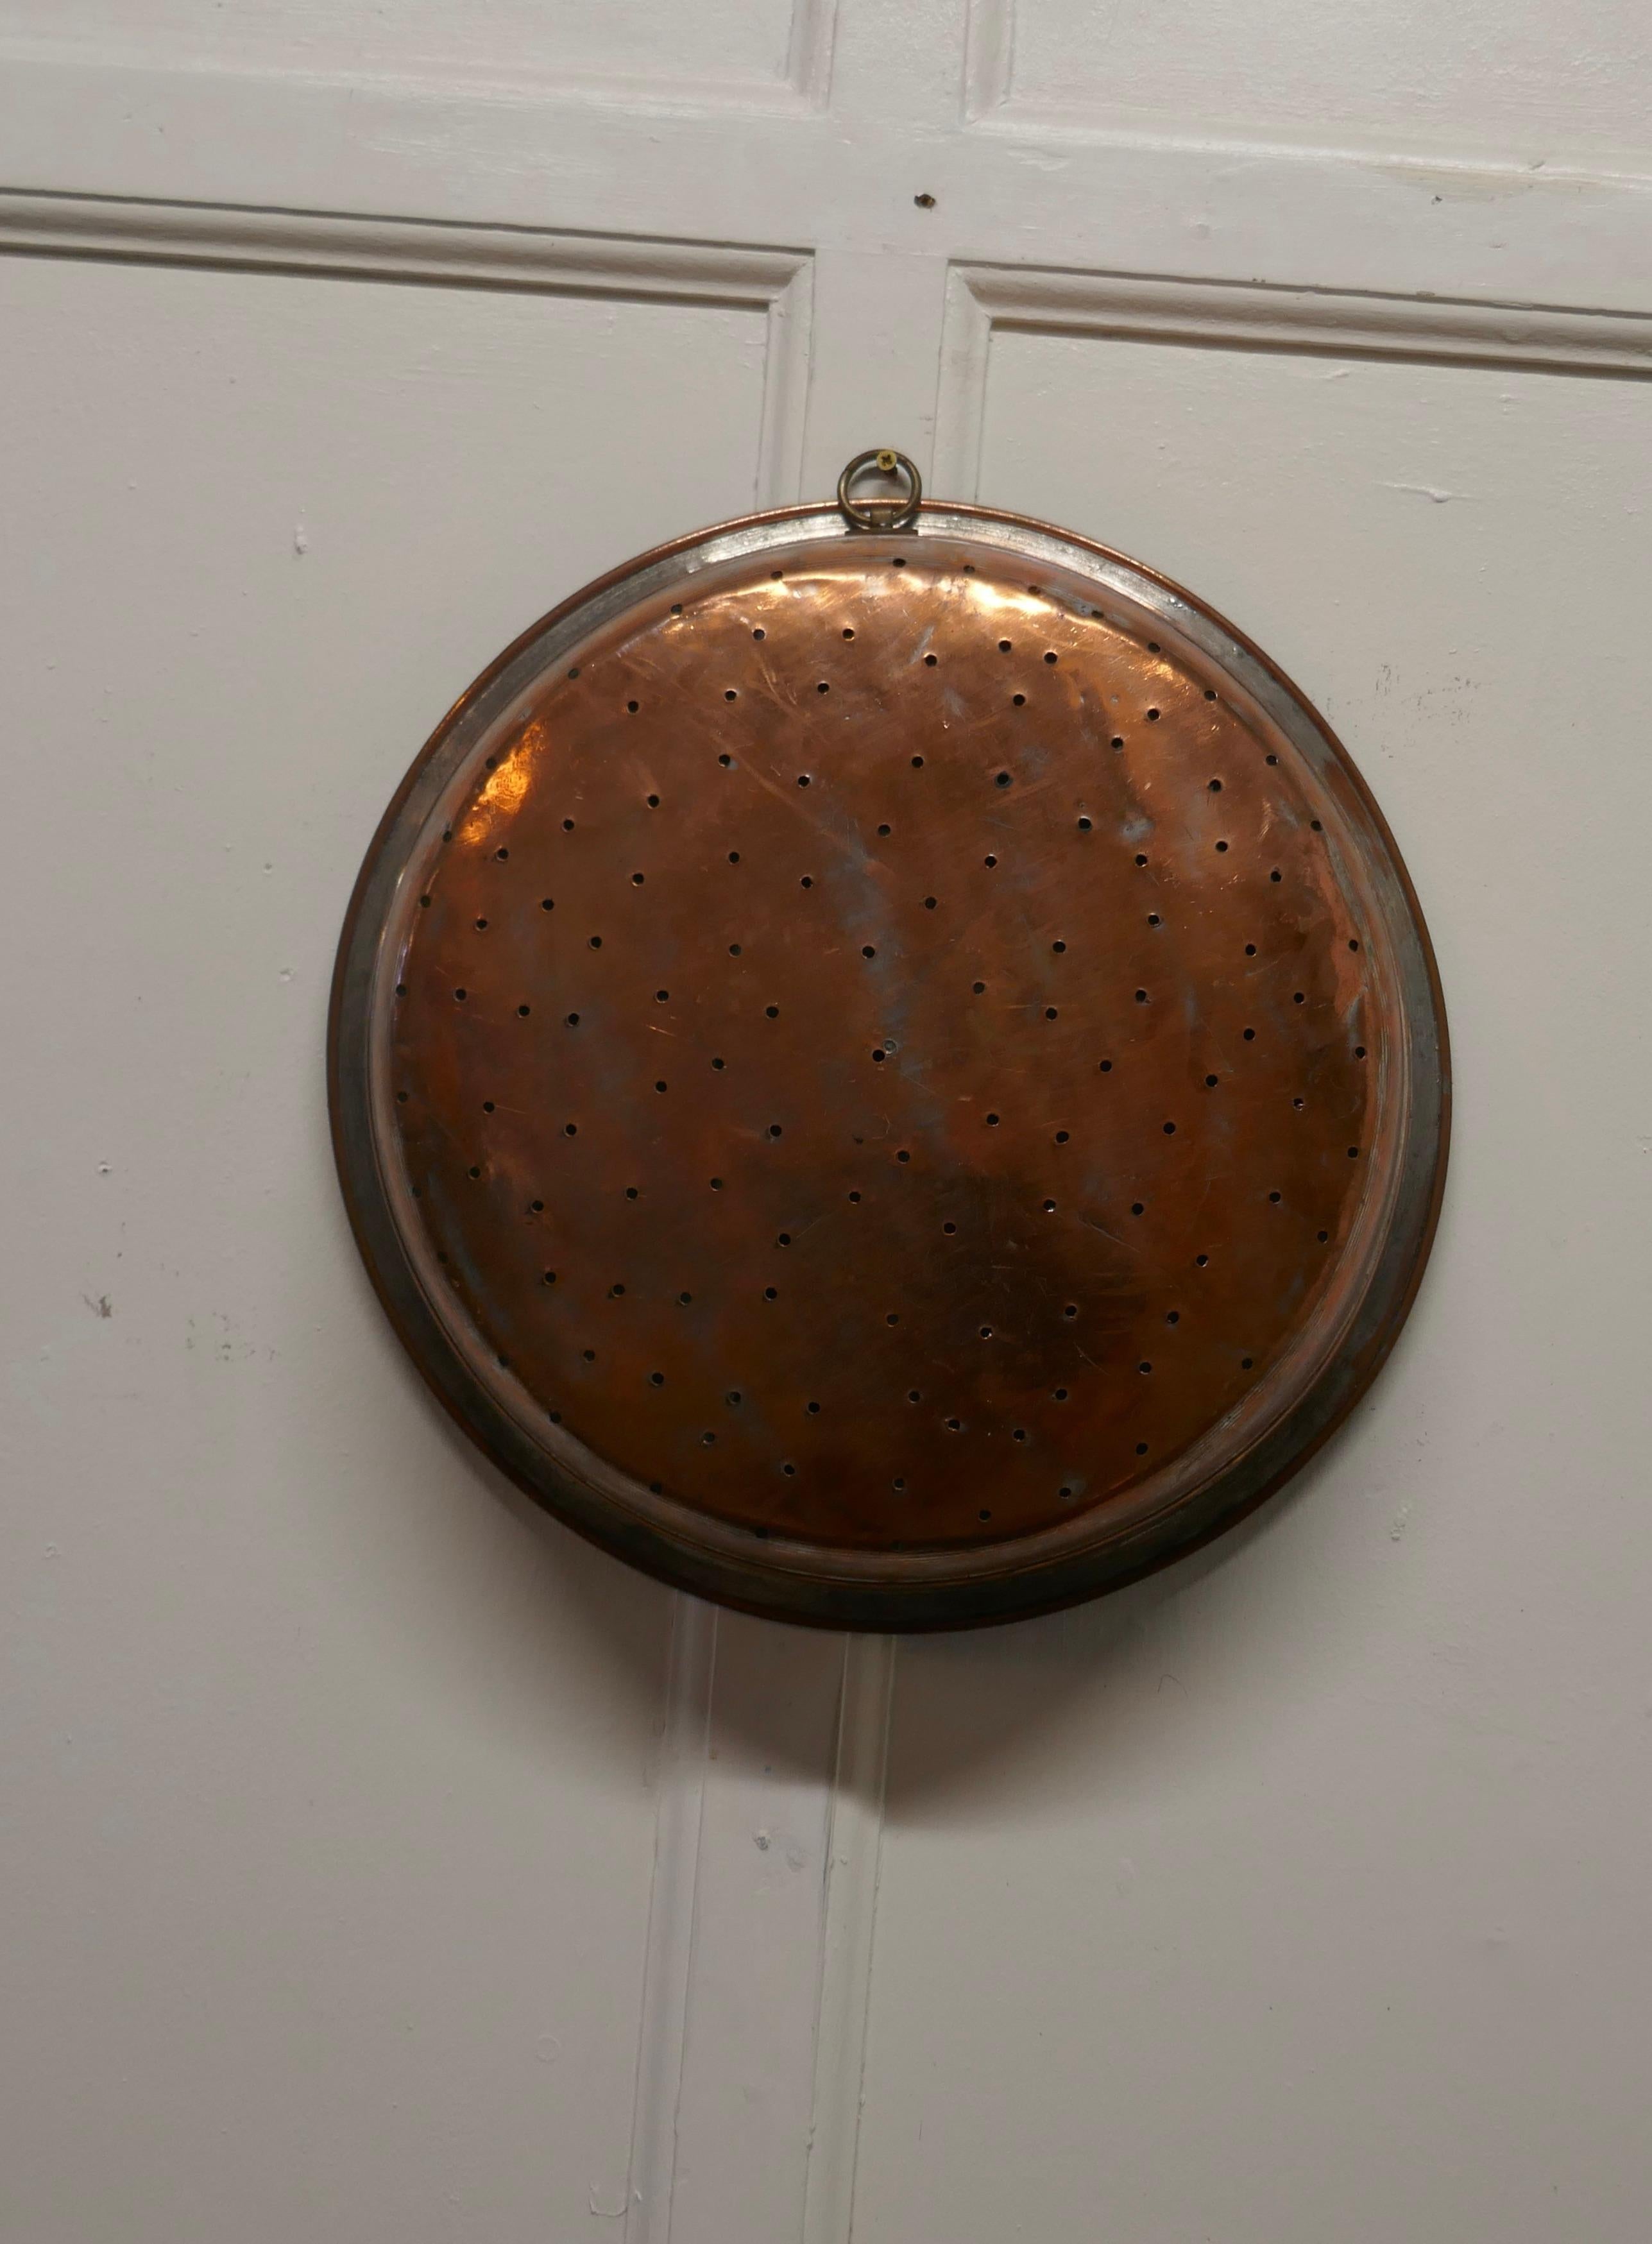 Large 19th Century Copper Draining Dish

This is a lovely looking Georgian Pan, the pan is both a drainer or steamer, it is tinned on the inside and has a ring handle so that it will hang on a wall hook, a lovely piece with a has a charming